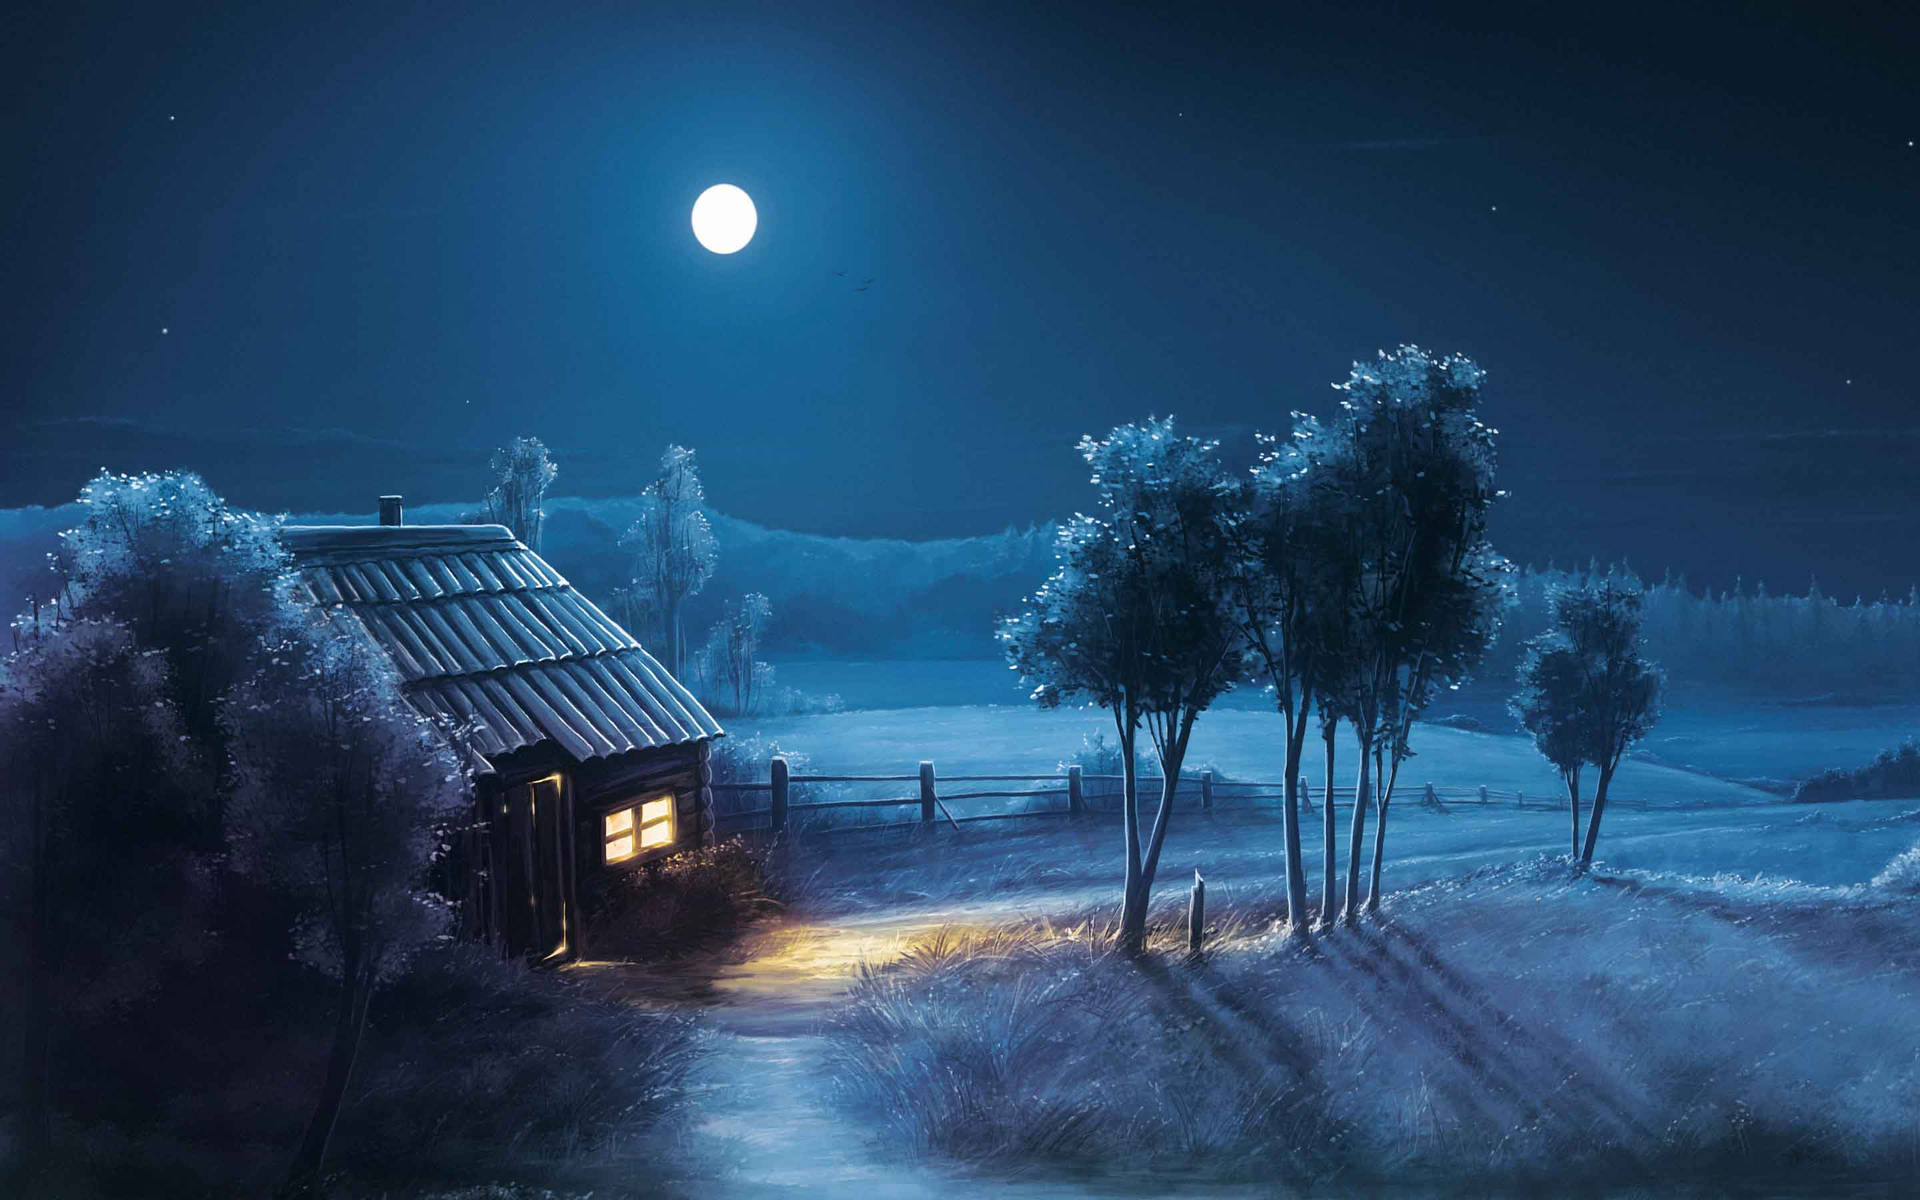 HD wallpaper of country life at night with little cottage under the moon. 